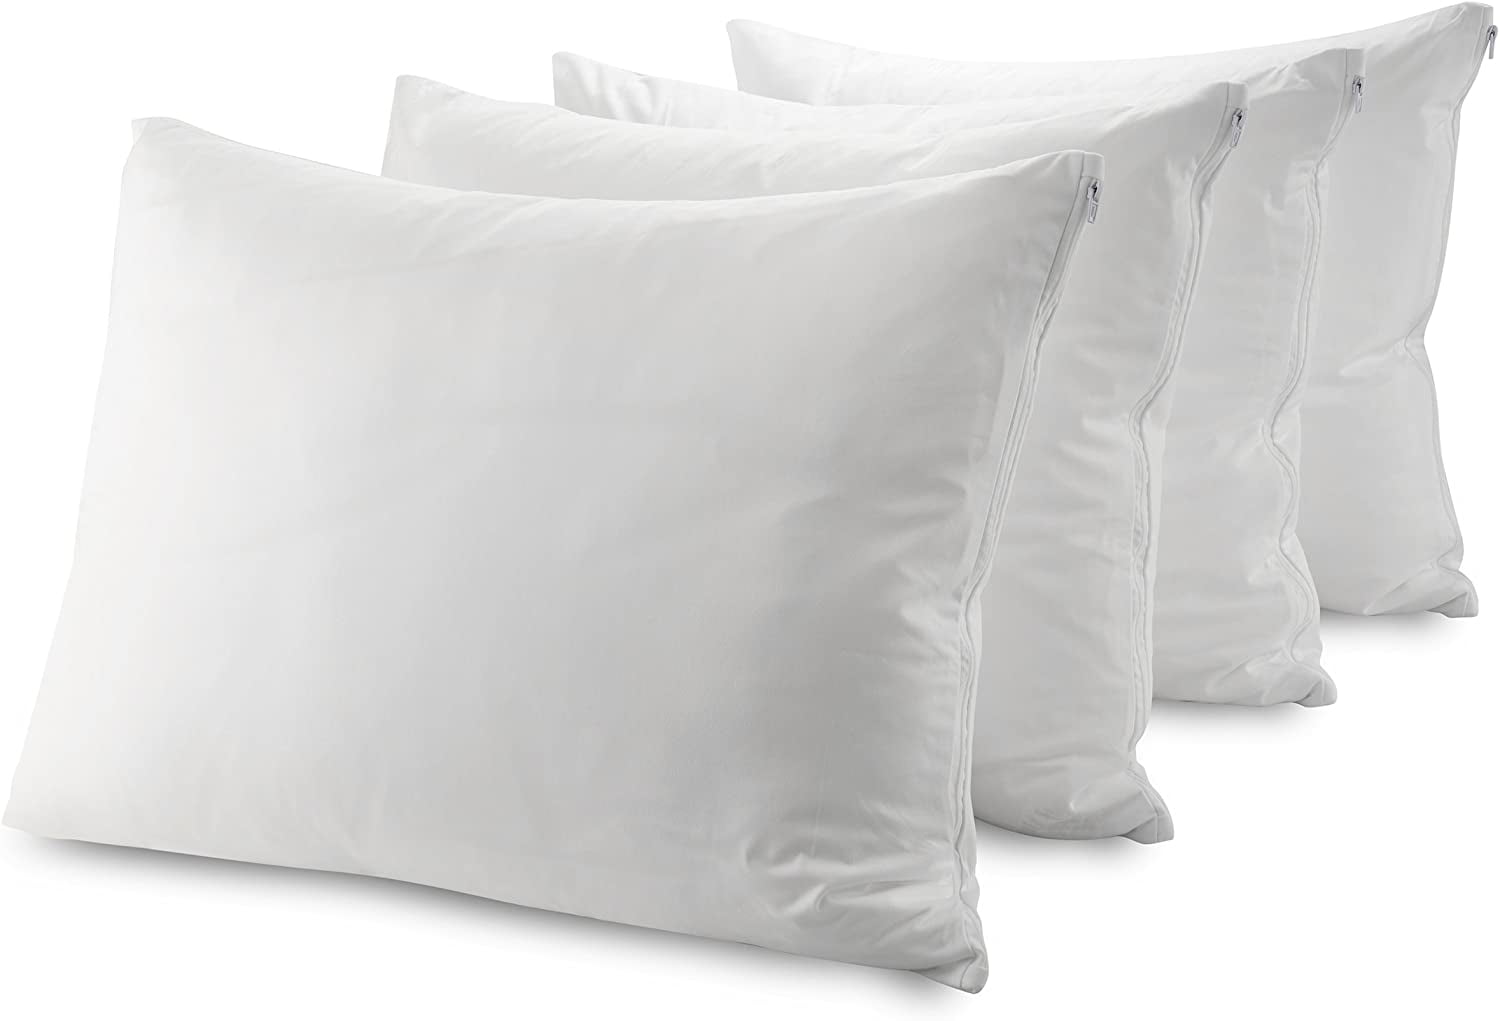 Details about   Extra Firm Pillow Premium Cotton Cover Machine Washable Queen Standard Sizes NEW